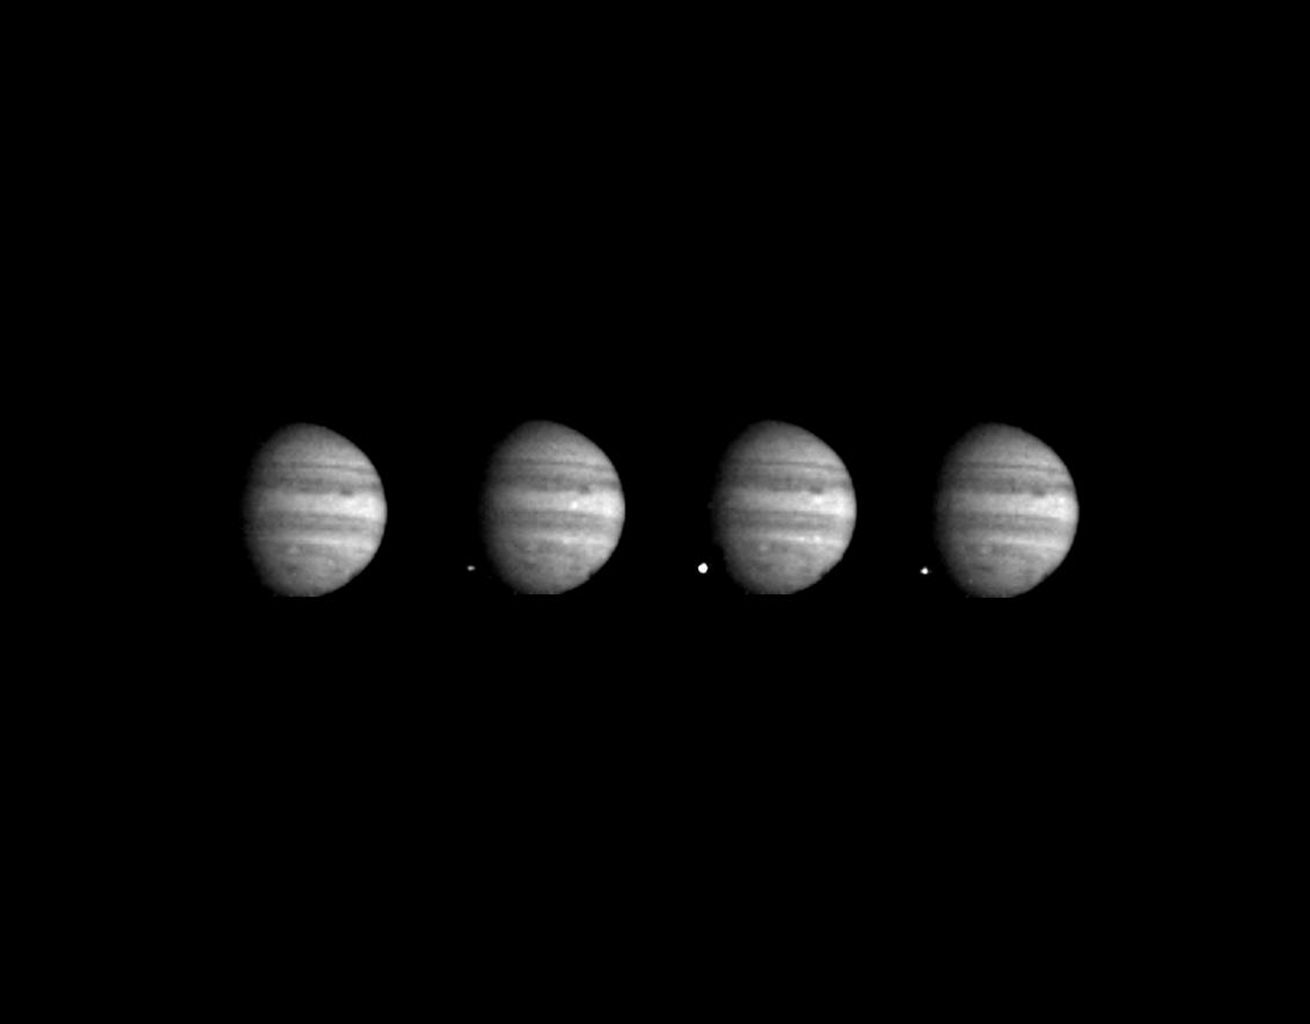 Four-panel image shows black and white jupiter, with a flash brightening and fading